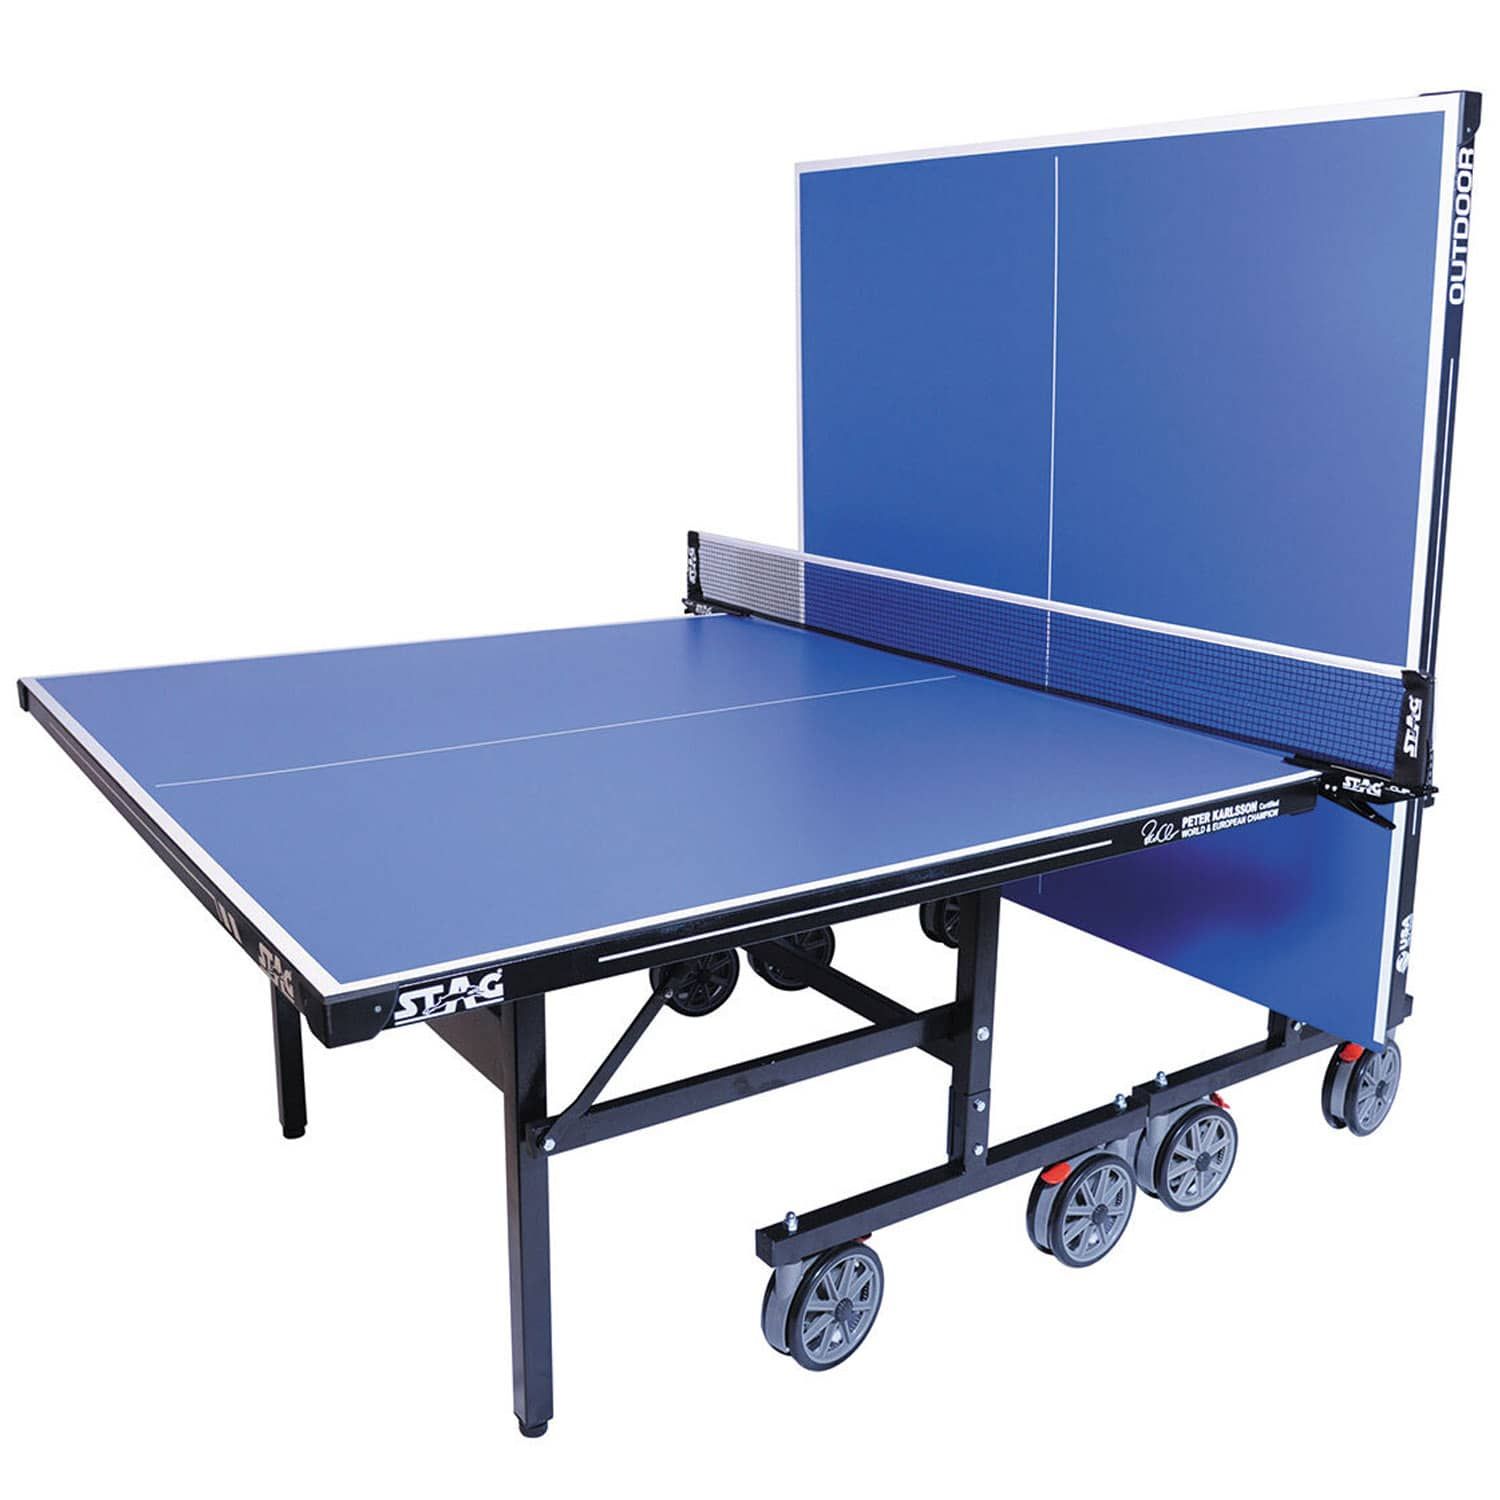 Buy Stag Pacifica Outdoor Table Tennis Table Buy Online at best price in UAE-Fitness Power House